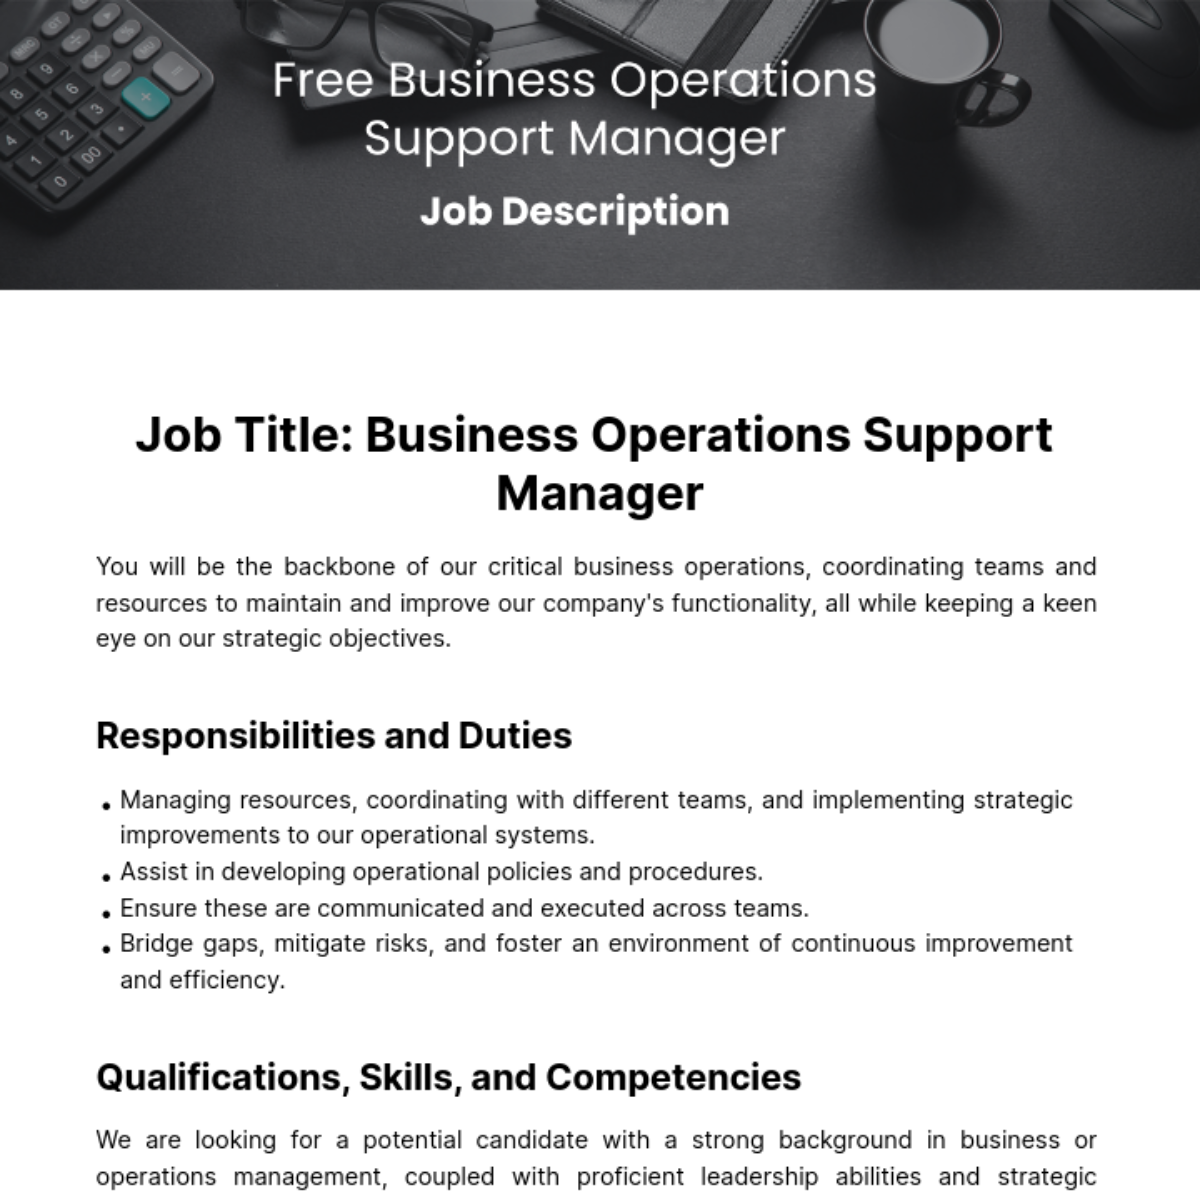 Free Business Operations Support Manager Job Description Template